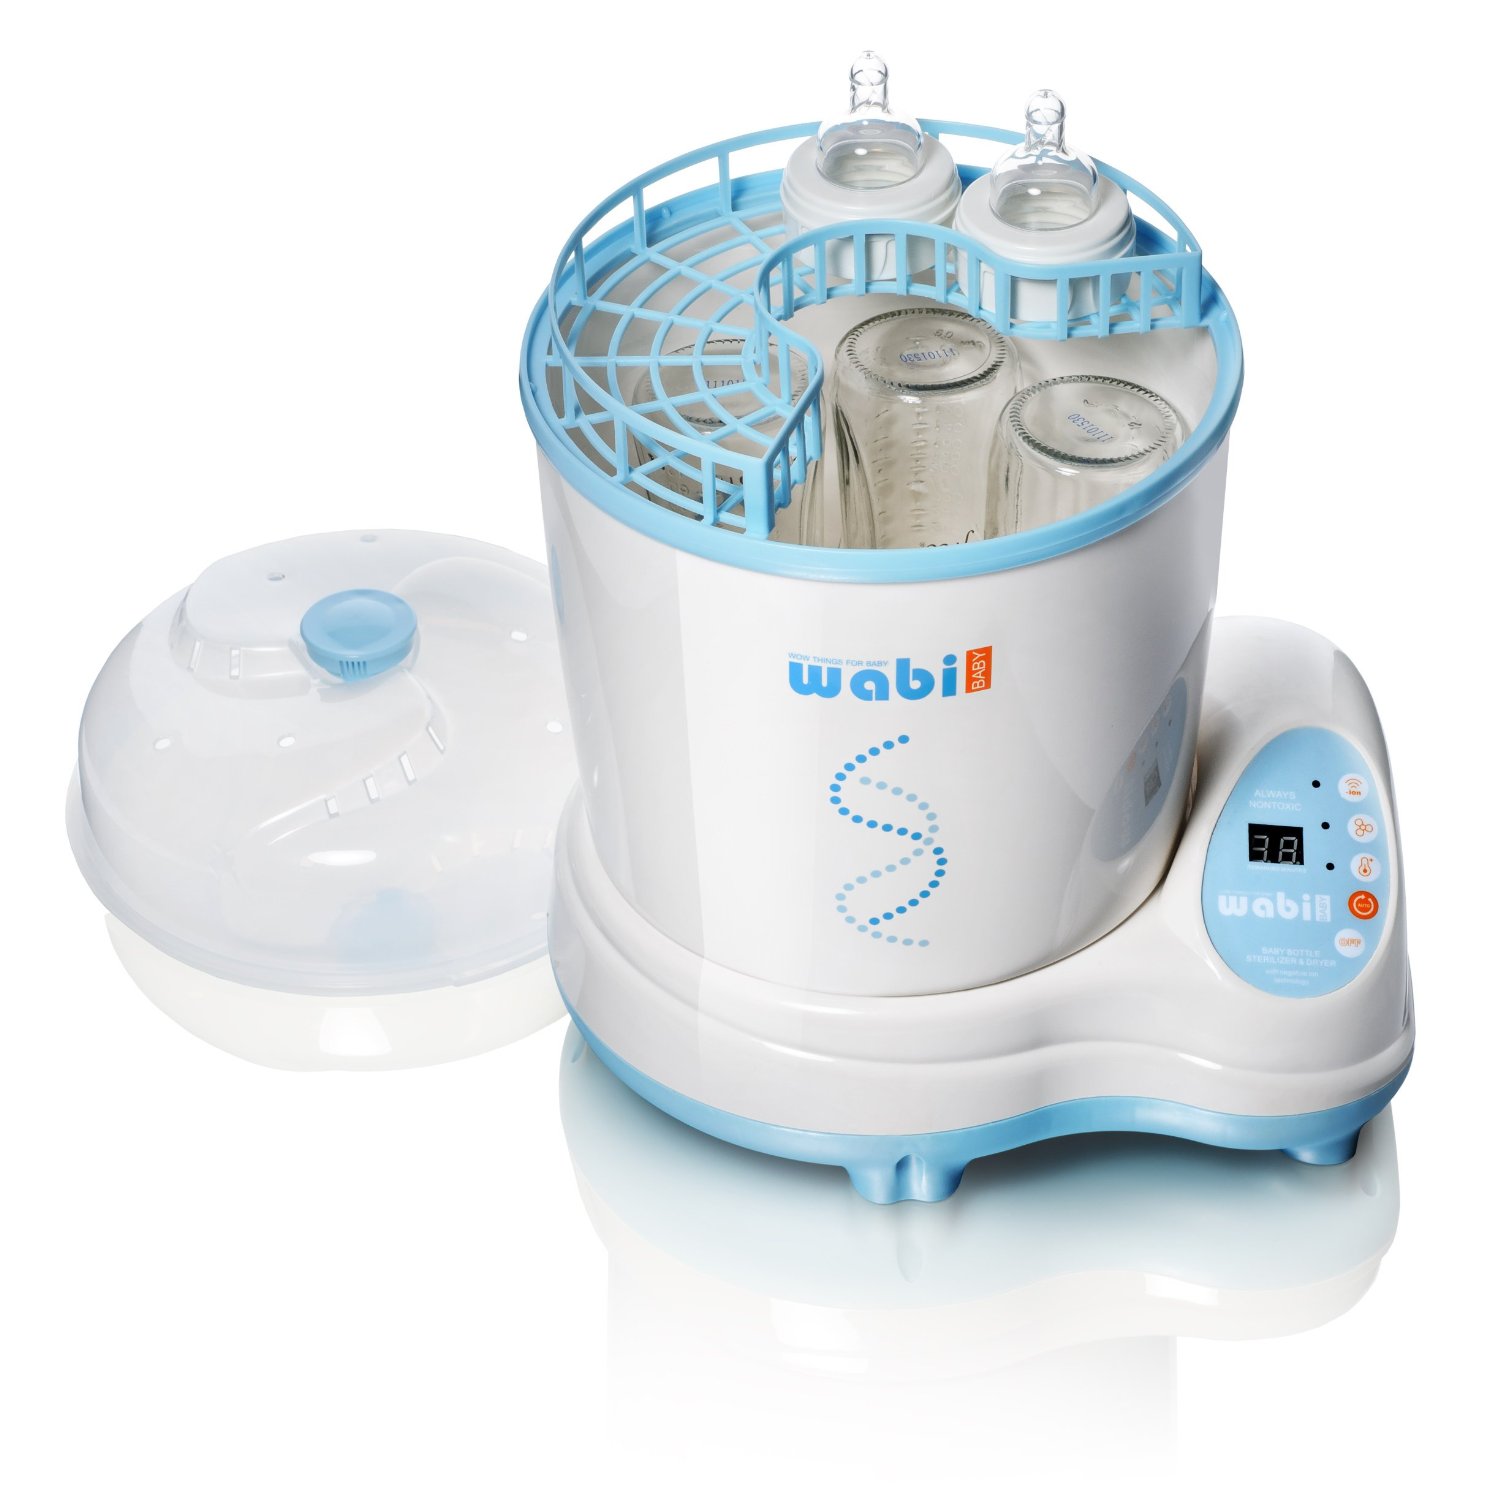 We are studying different types of sterilizers for baby bottles: UV-C, steam and microwave options